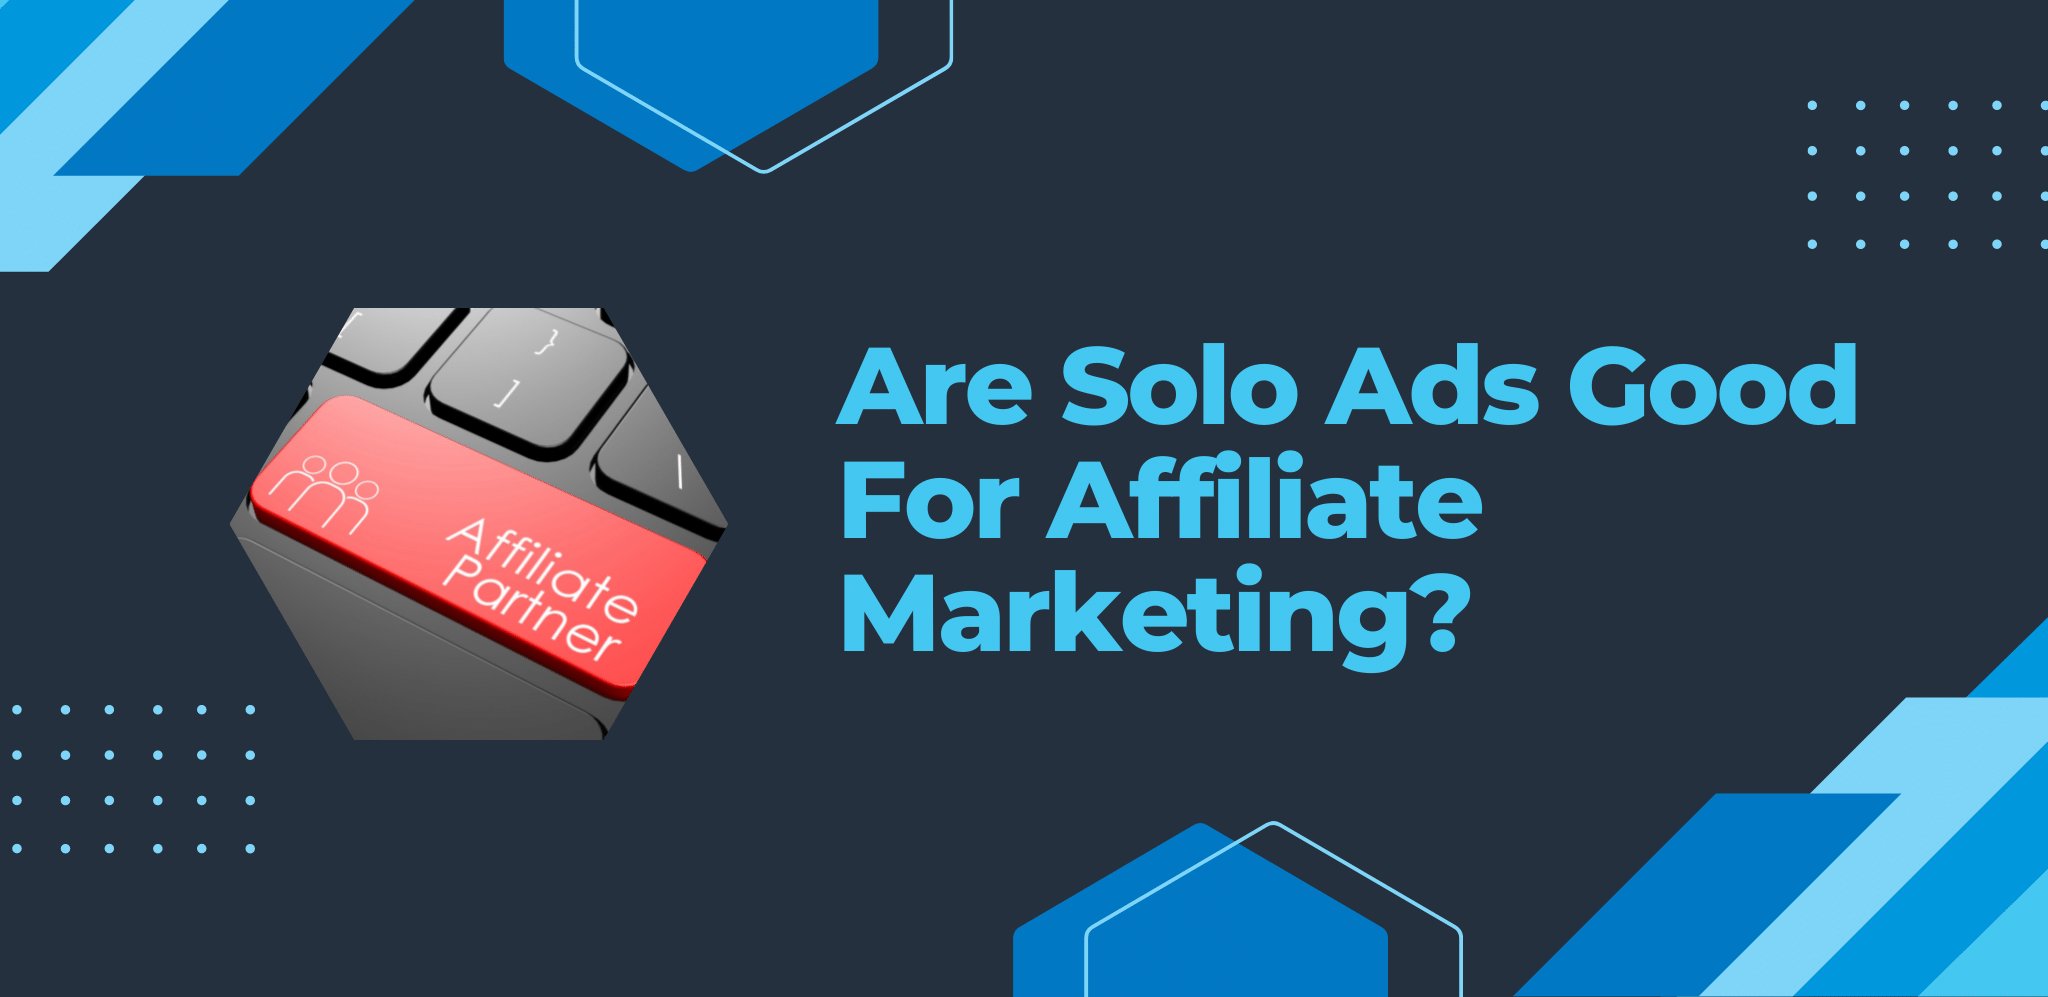 Are Solo Ads Good For Affiliate Marketing